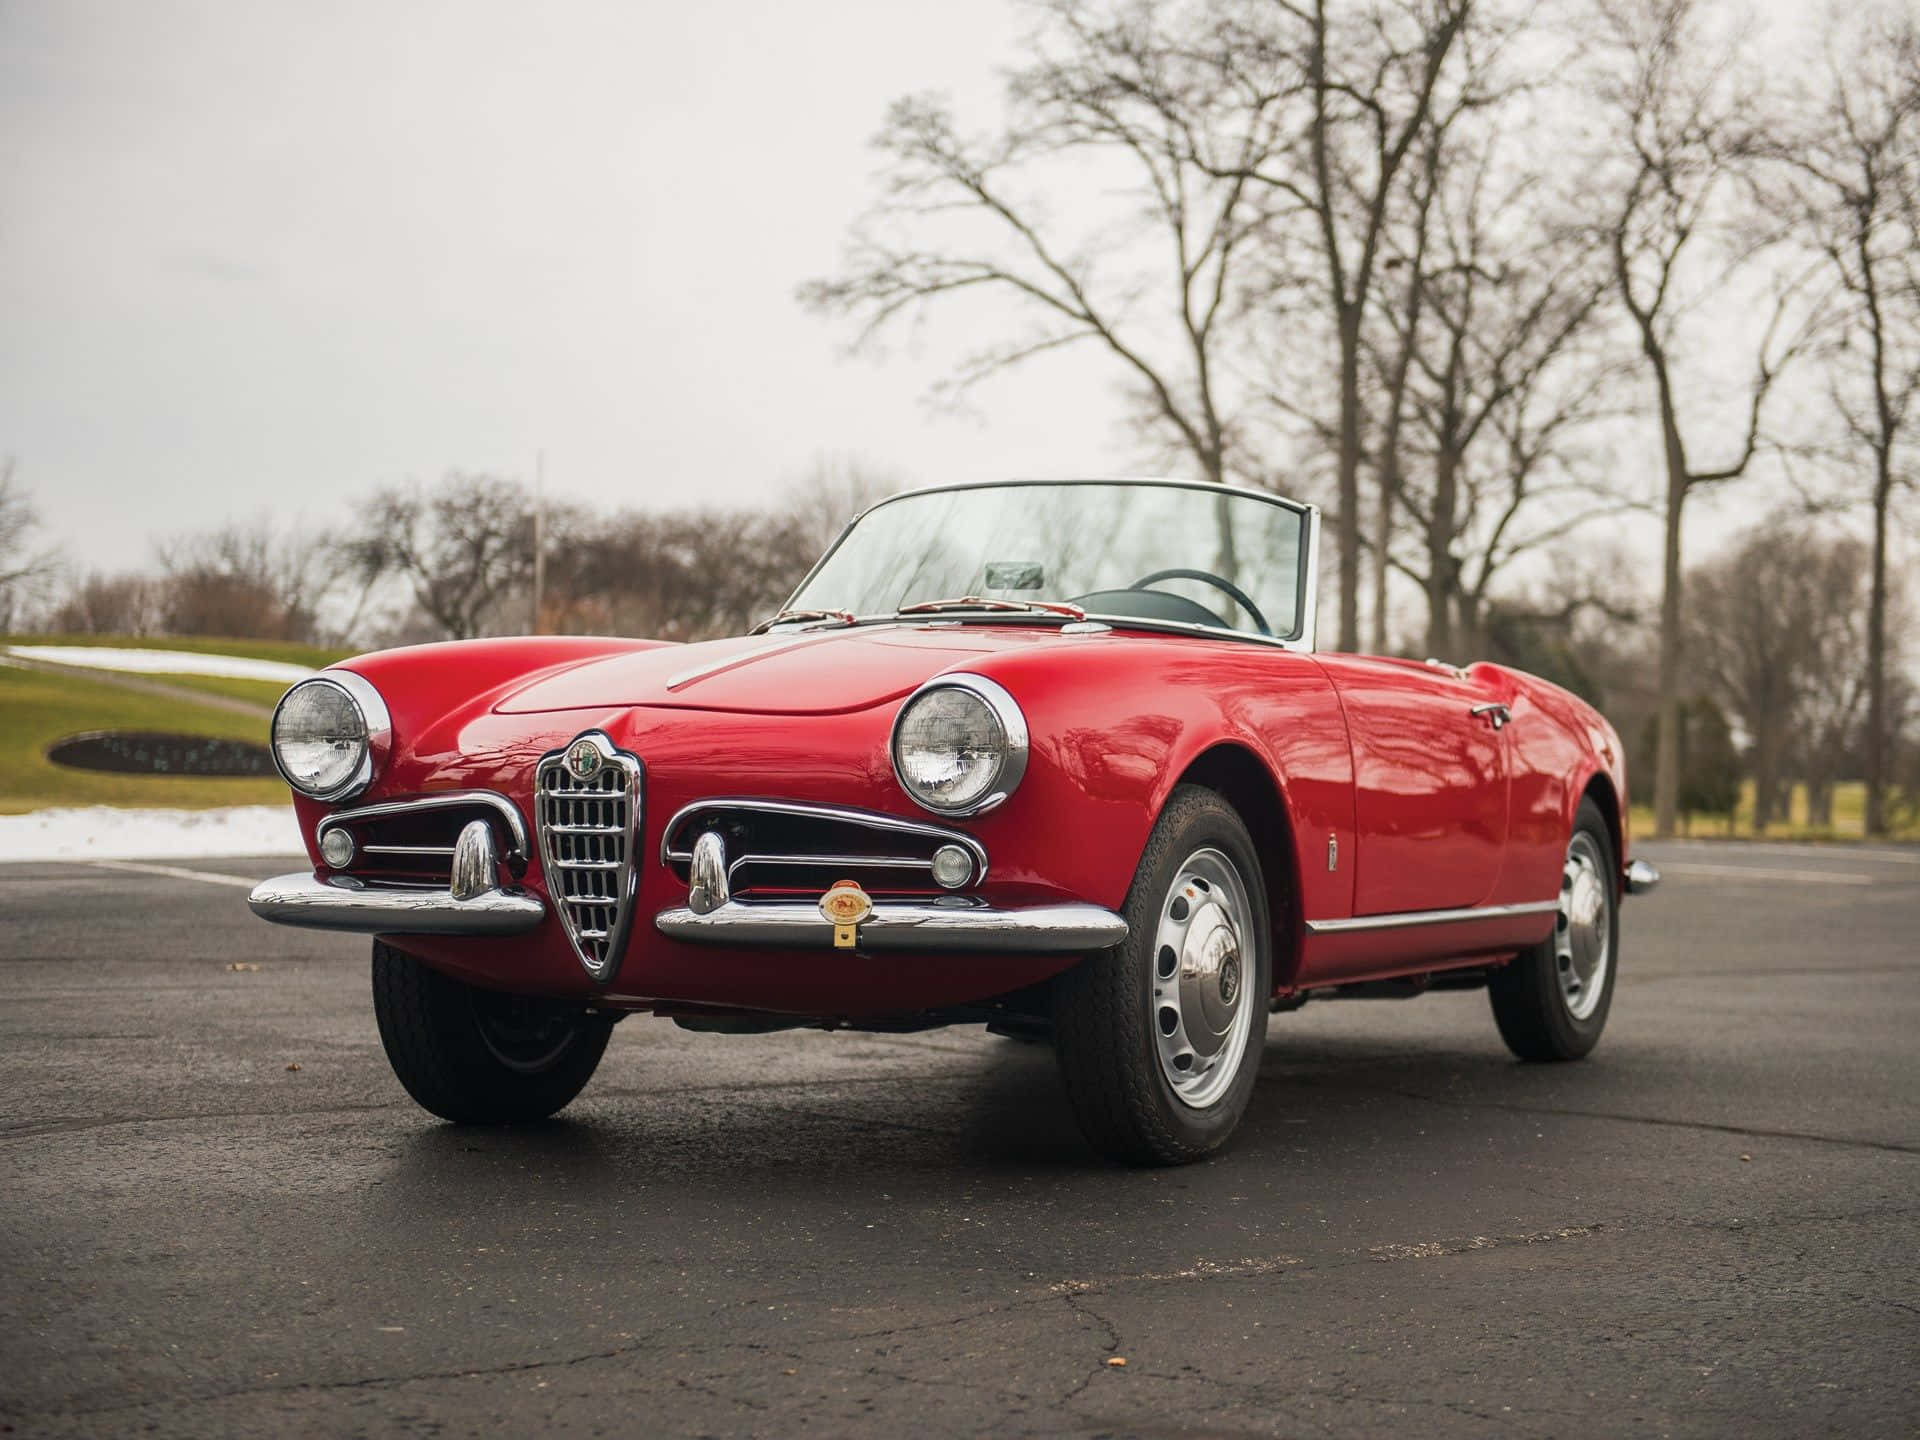 Captivating Alfa Romeo Spider in a Stunning Scenic Background Wallpaper